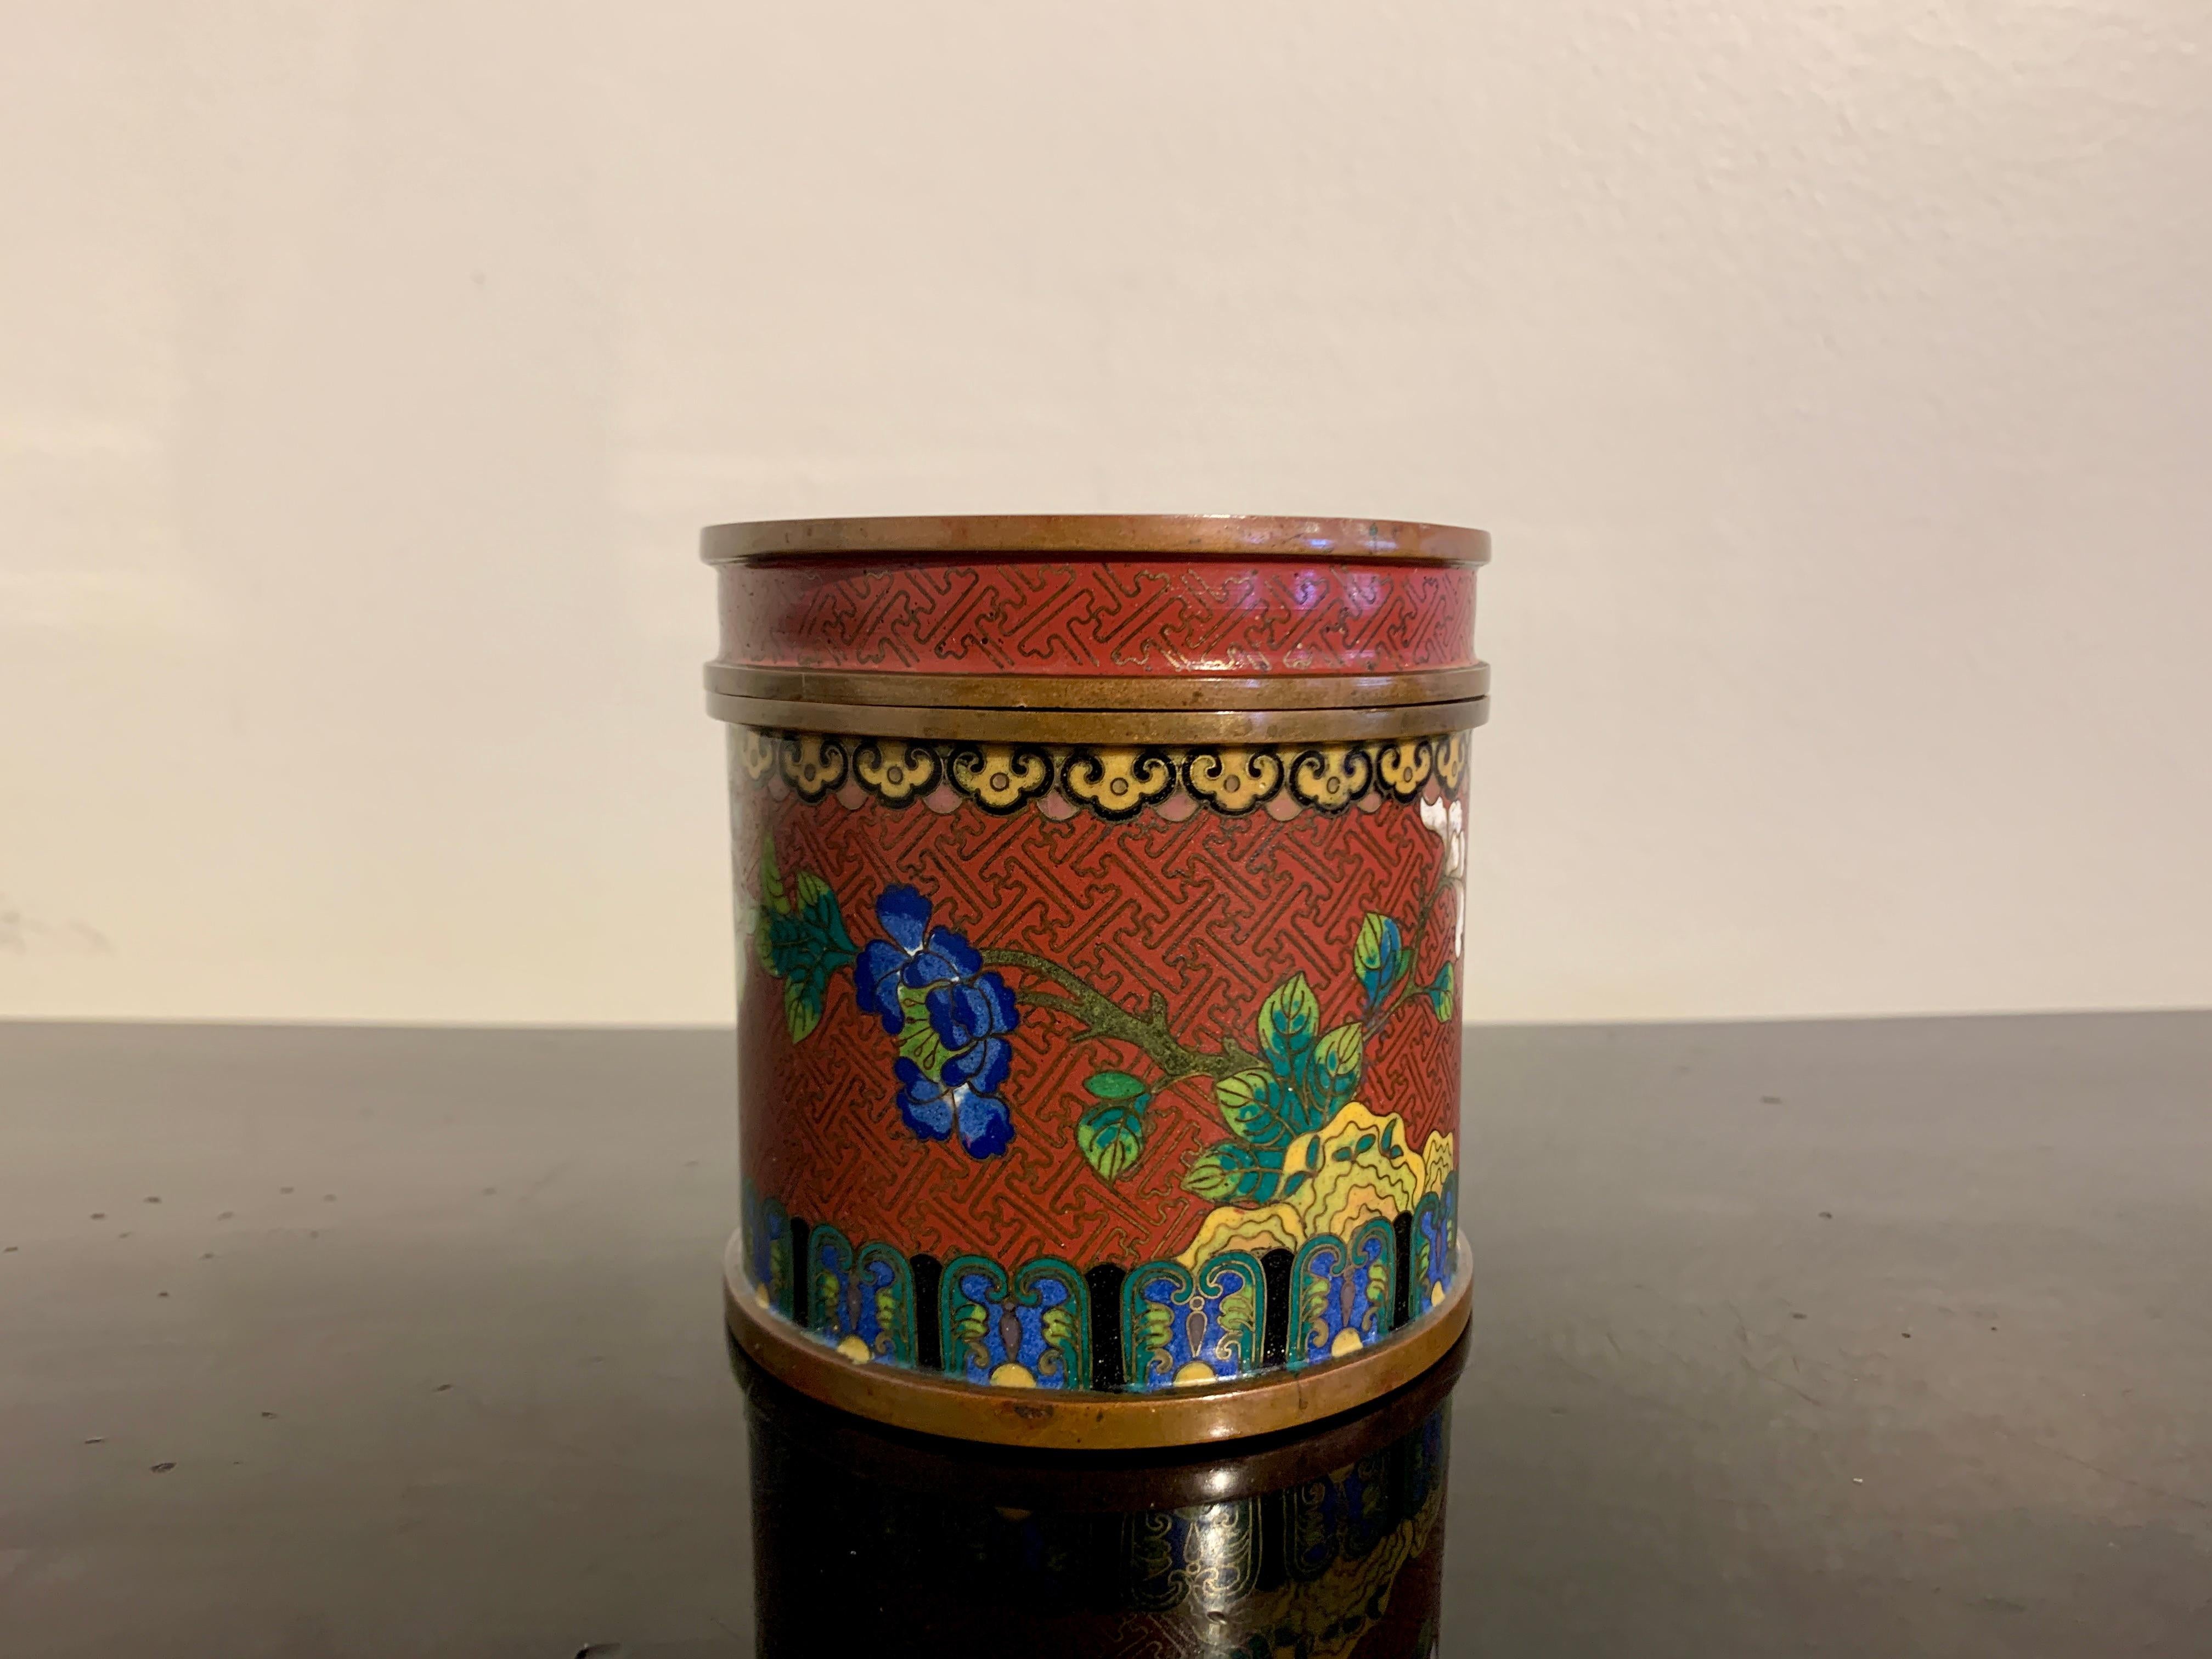 A delightful antique Chinese cloisonné cylindrical box and cover by Lao Tian Li, late Qing Dynasty, circa 1900, China.

The box of cylindrical form and worked all over in cloisonné enamels of primarily red, blue, green, white and yellow, all